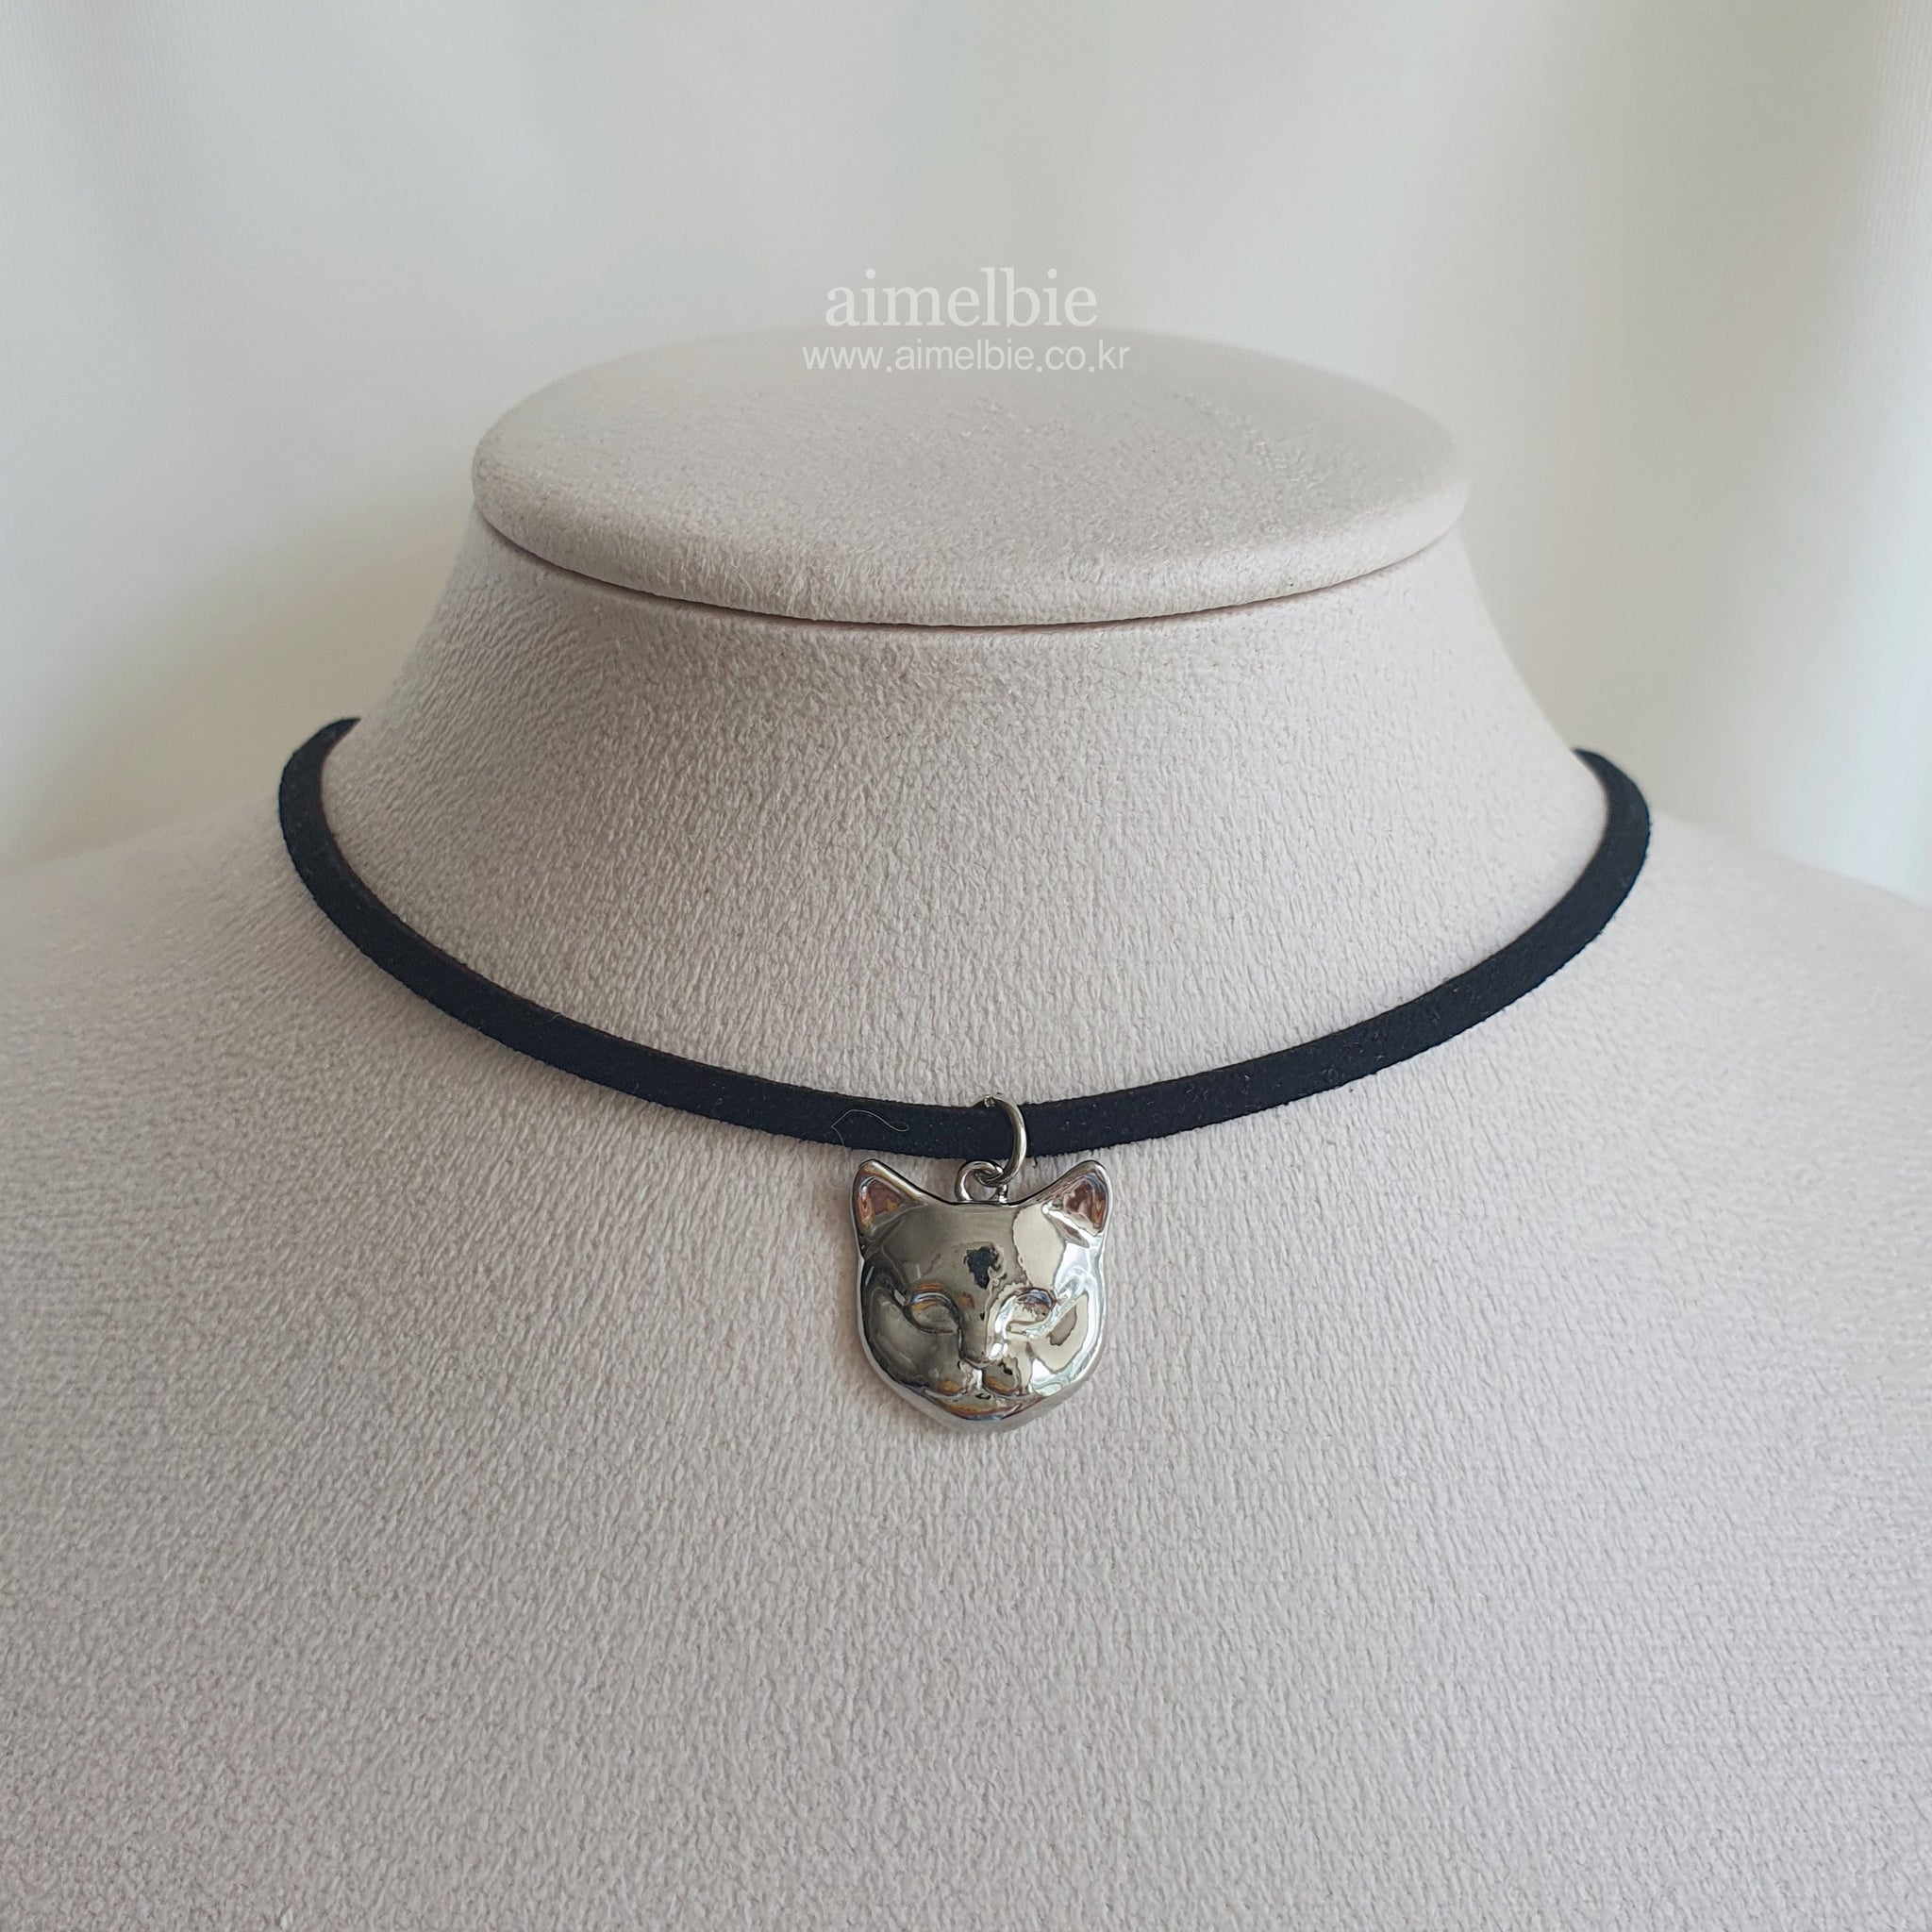 Melbie the Cat Series - Cat Face Choker (Silver ver.) (FIFTY FIFTY Ara aimelbie